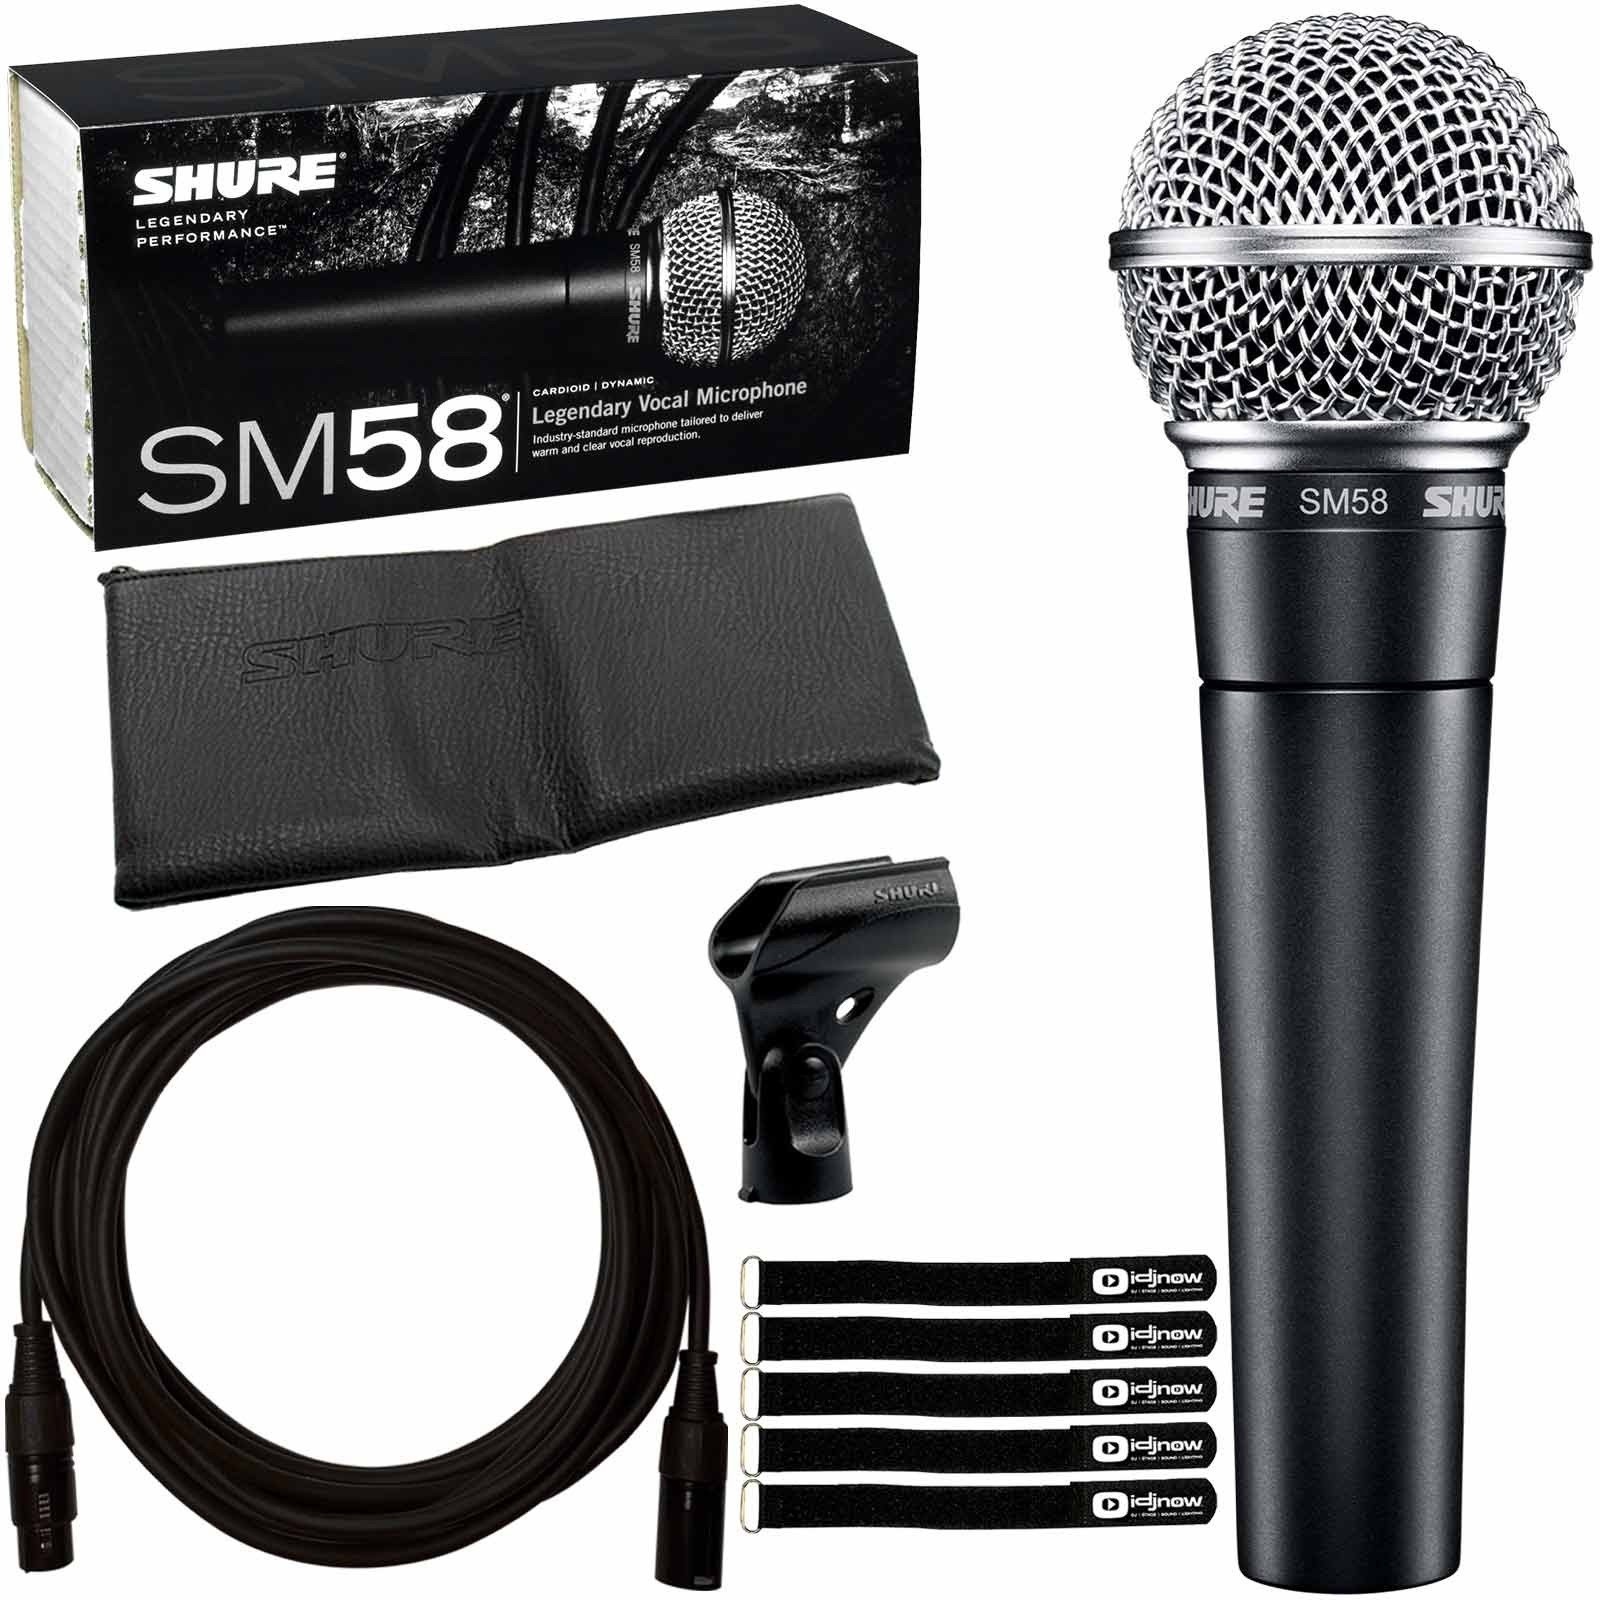 shure-sm58-vocal-microphone-with-cable-cable-ties-package-b93